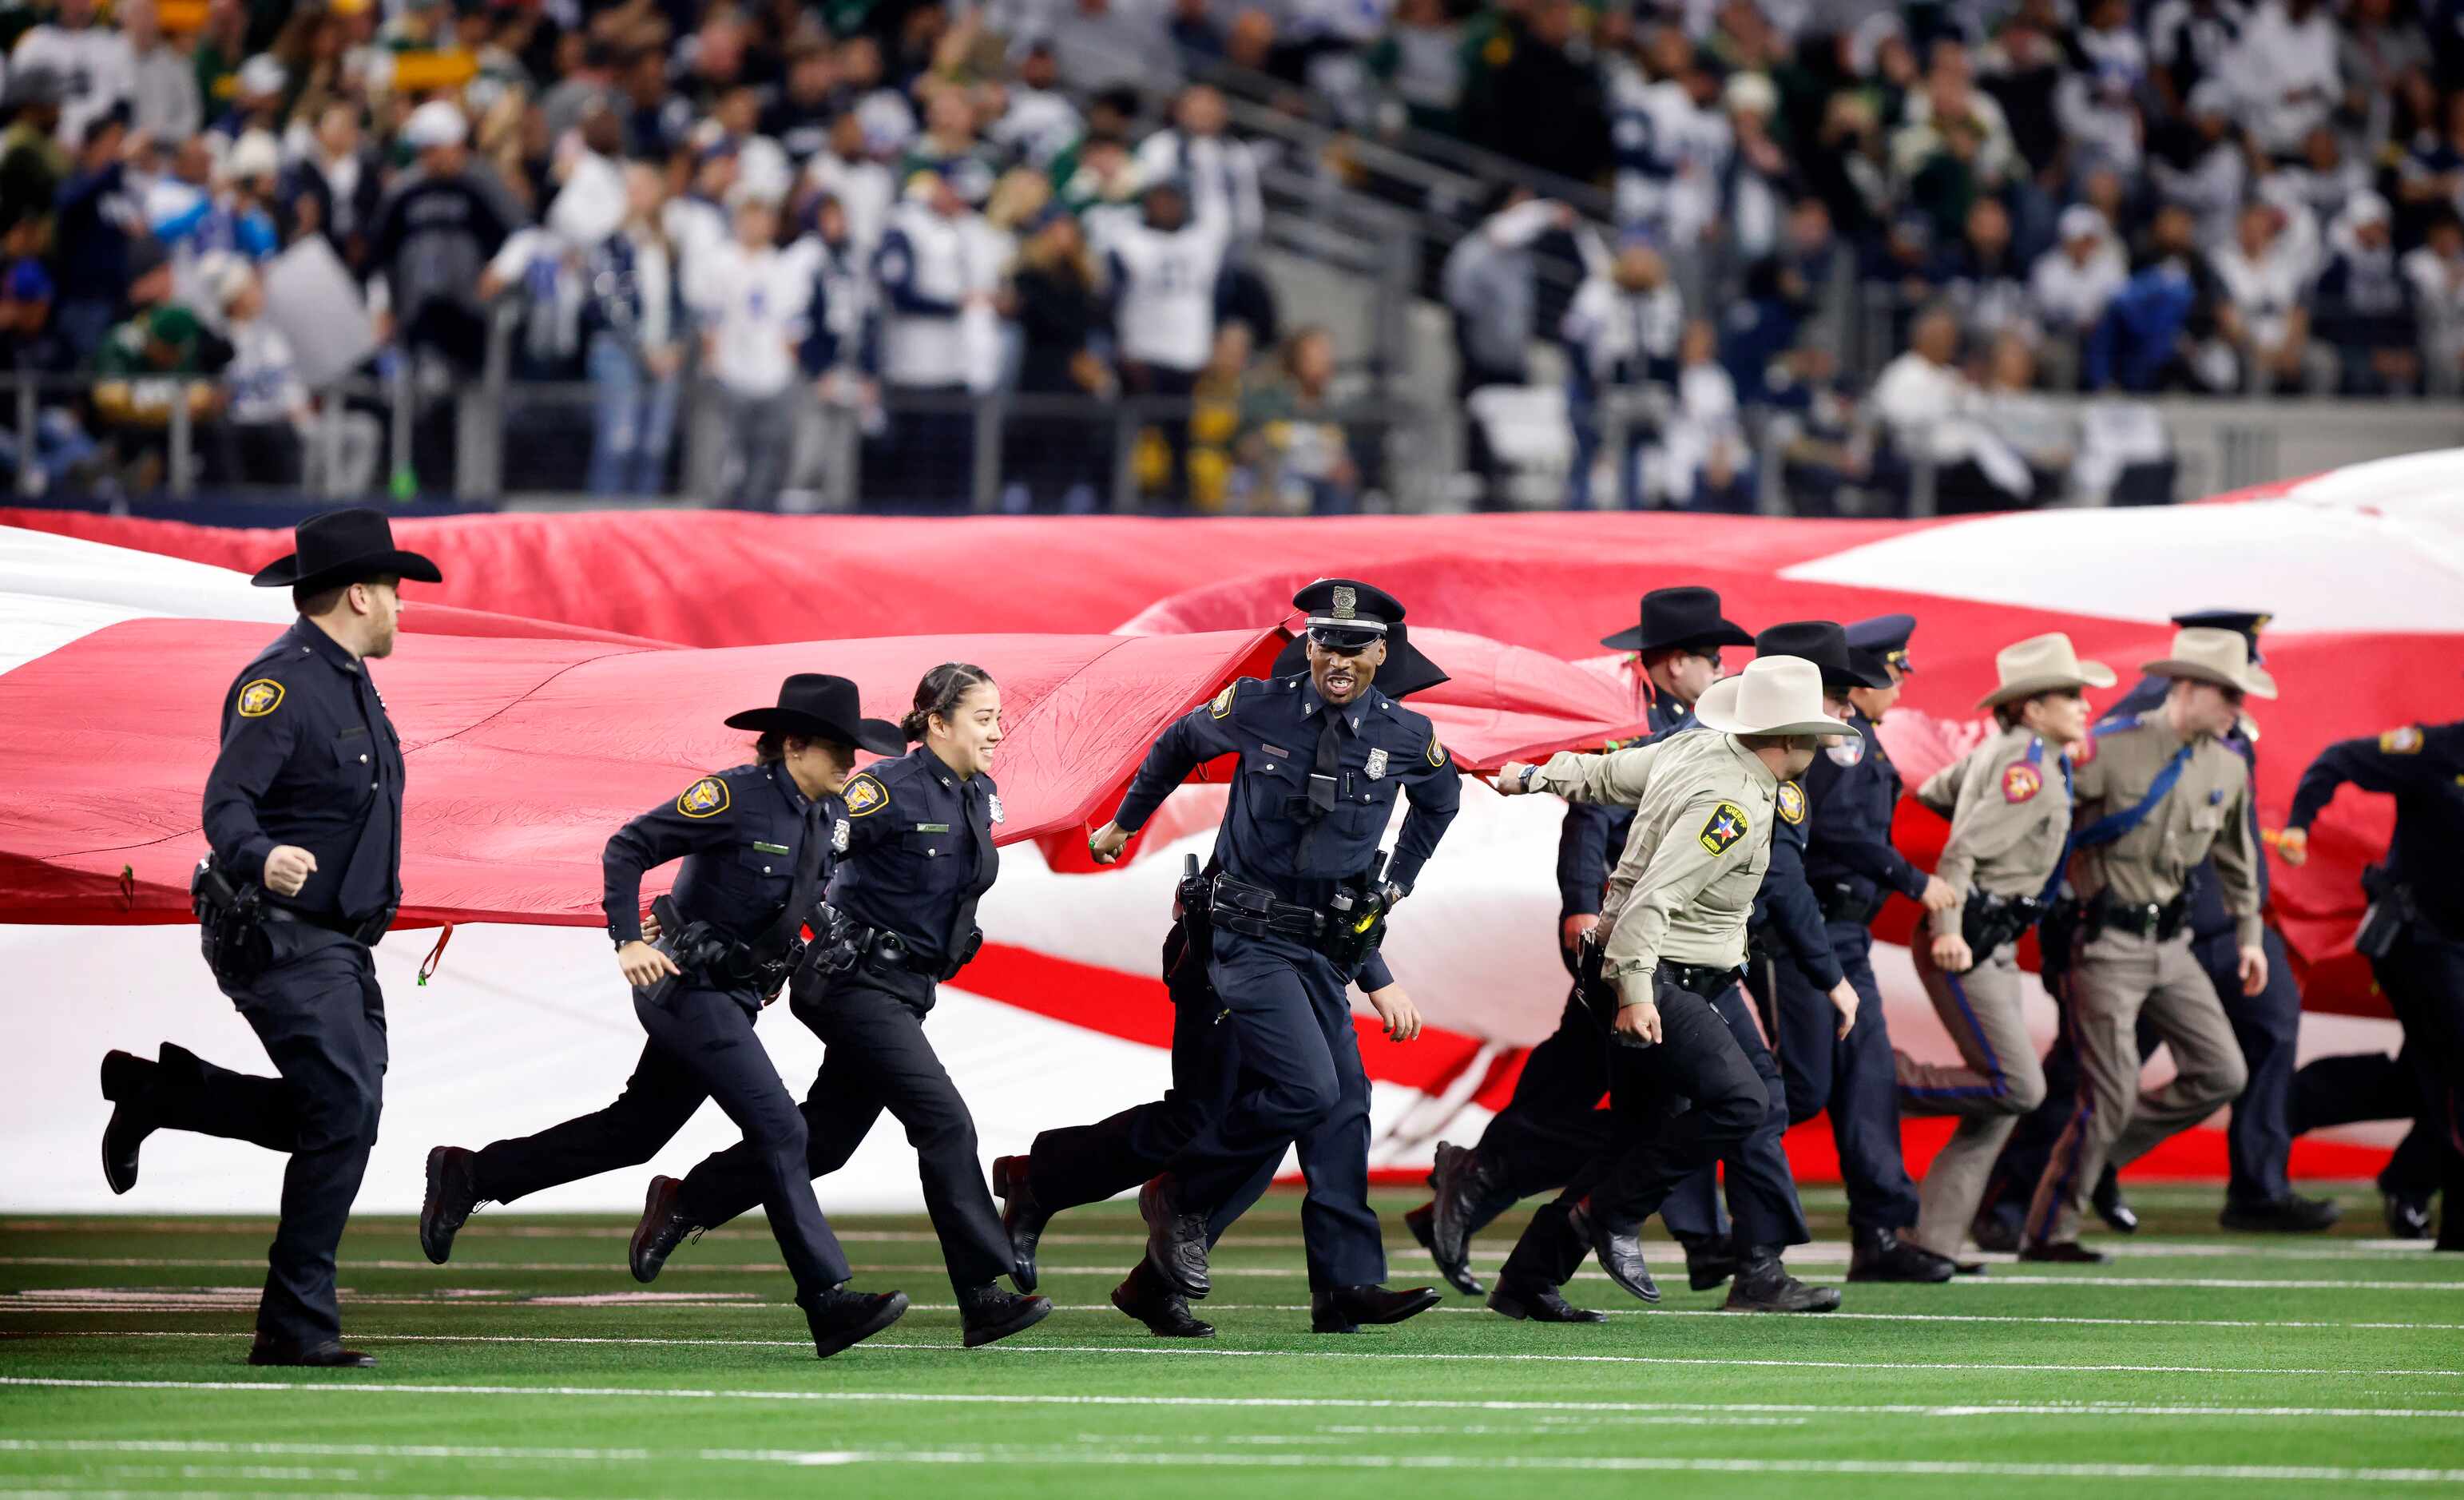 Law enforcement officers run with a field-sized U.S. flag as they spread it out for the...